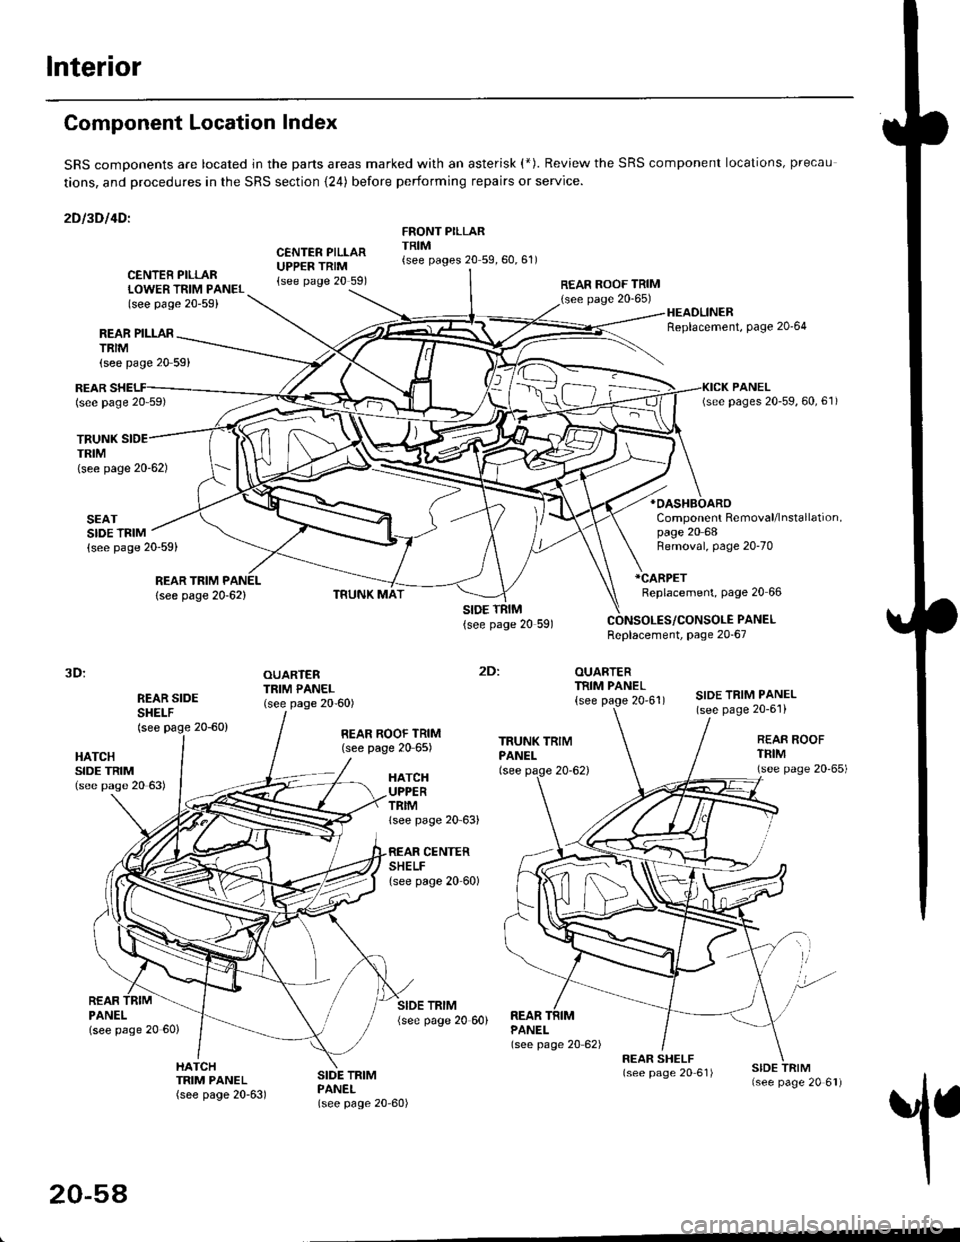 HONDA CIVIC 1997 6.G Workshop Manual Interior
Component Location Index
SRS comDonents are located jn the parts areas marked with an asterisk (*). Review the SRS component locations, precau
tions, and procedures in the SRS section {24) be